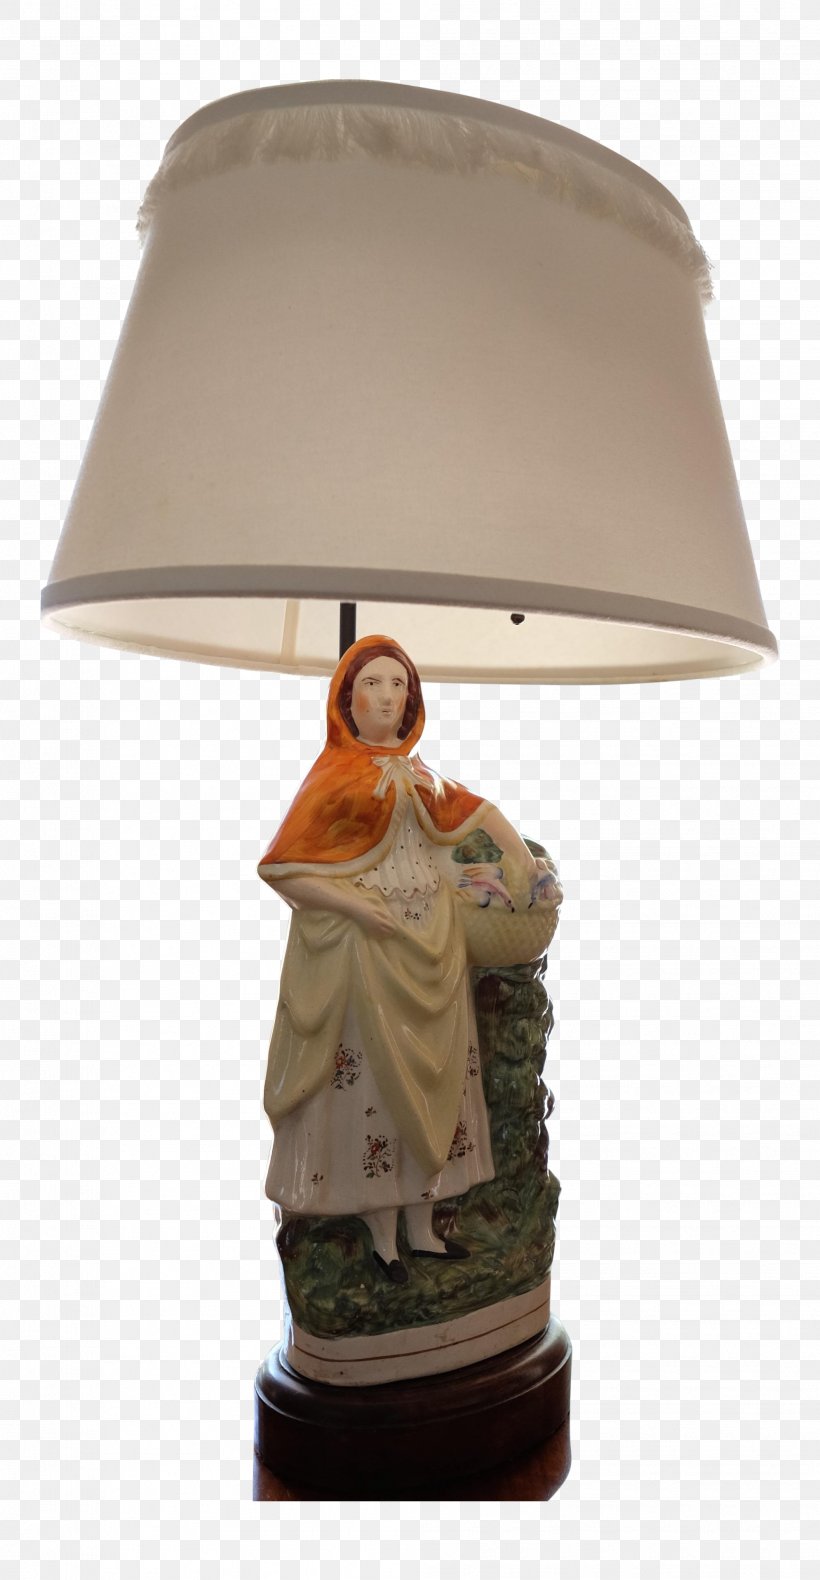 Figurine Lamp Shades, PNG, 1989x3833px, Figurine, Lamp, Lamp Shades, Lampshade, Lighting Accessory Download Free